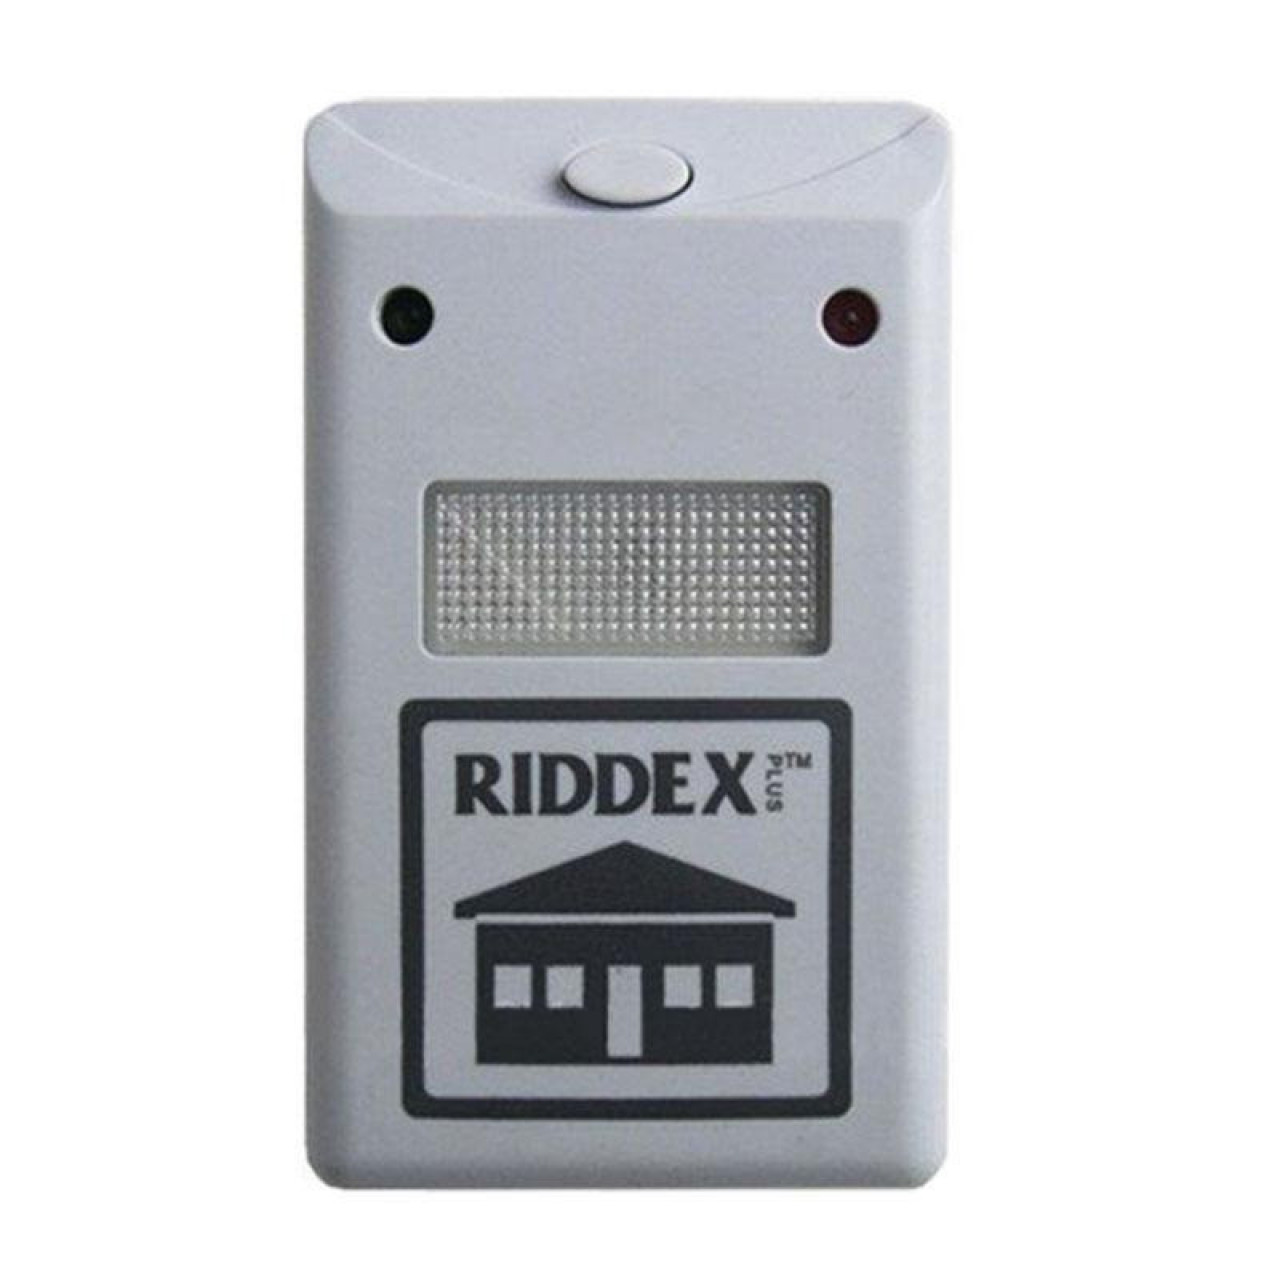 Riddex Plus Electronic Répulsif Ultrason Anti-Nuisibles, Soins Personnels, Conakry